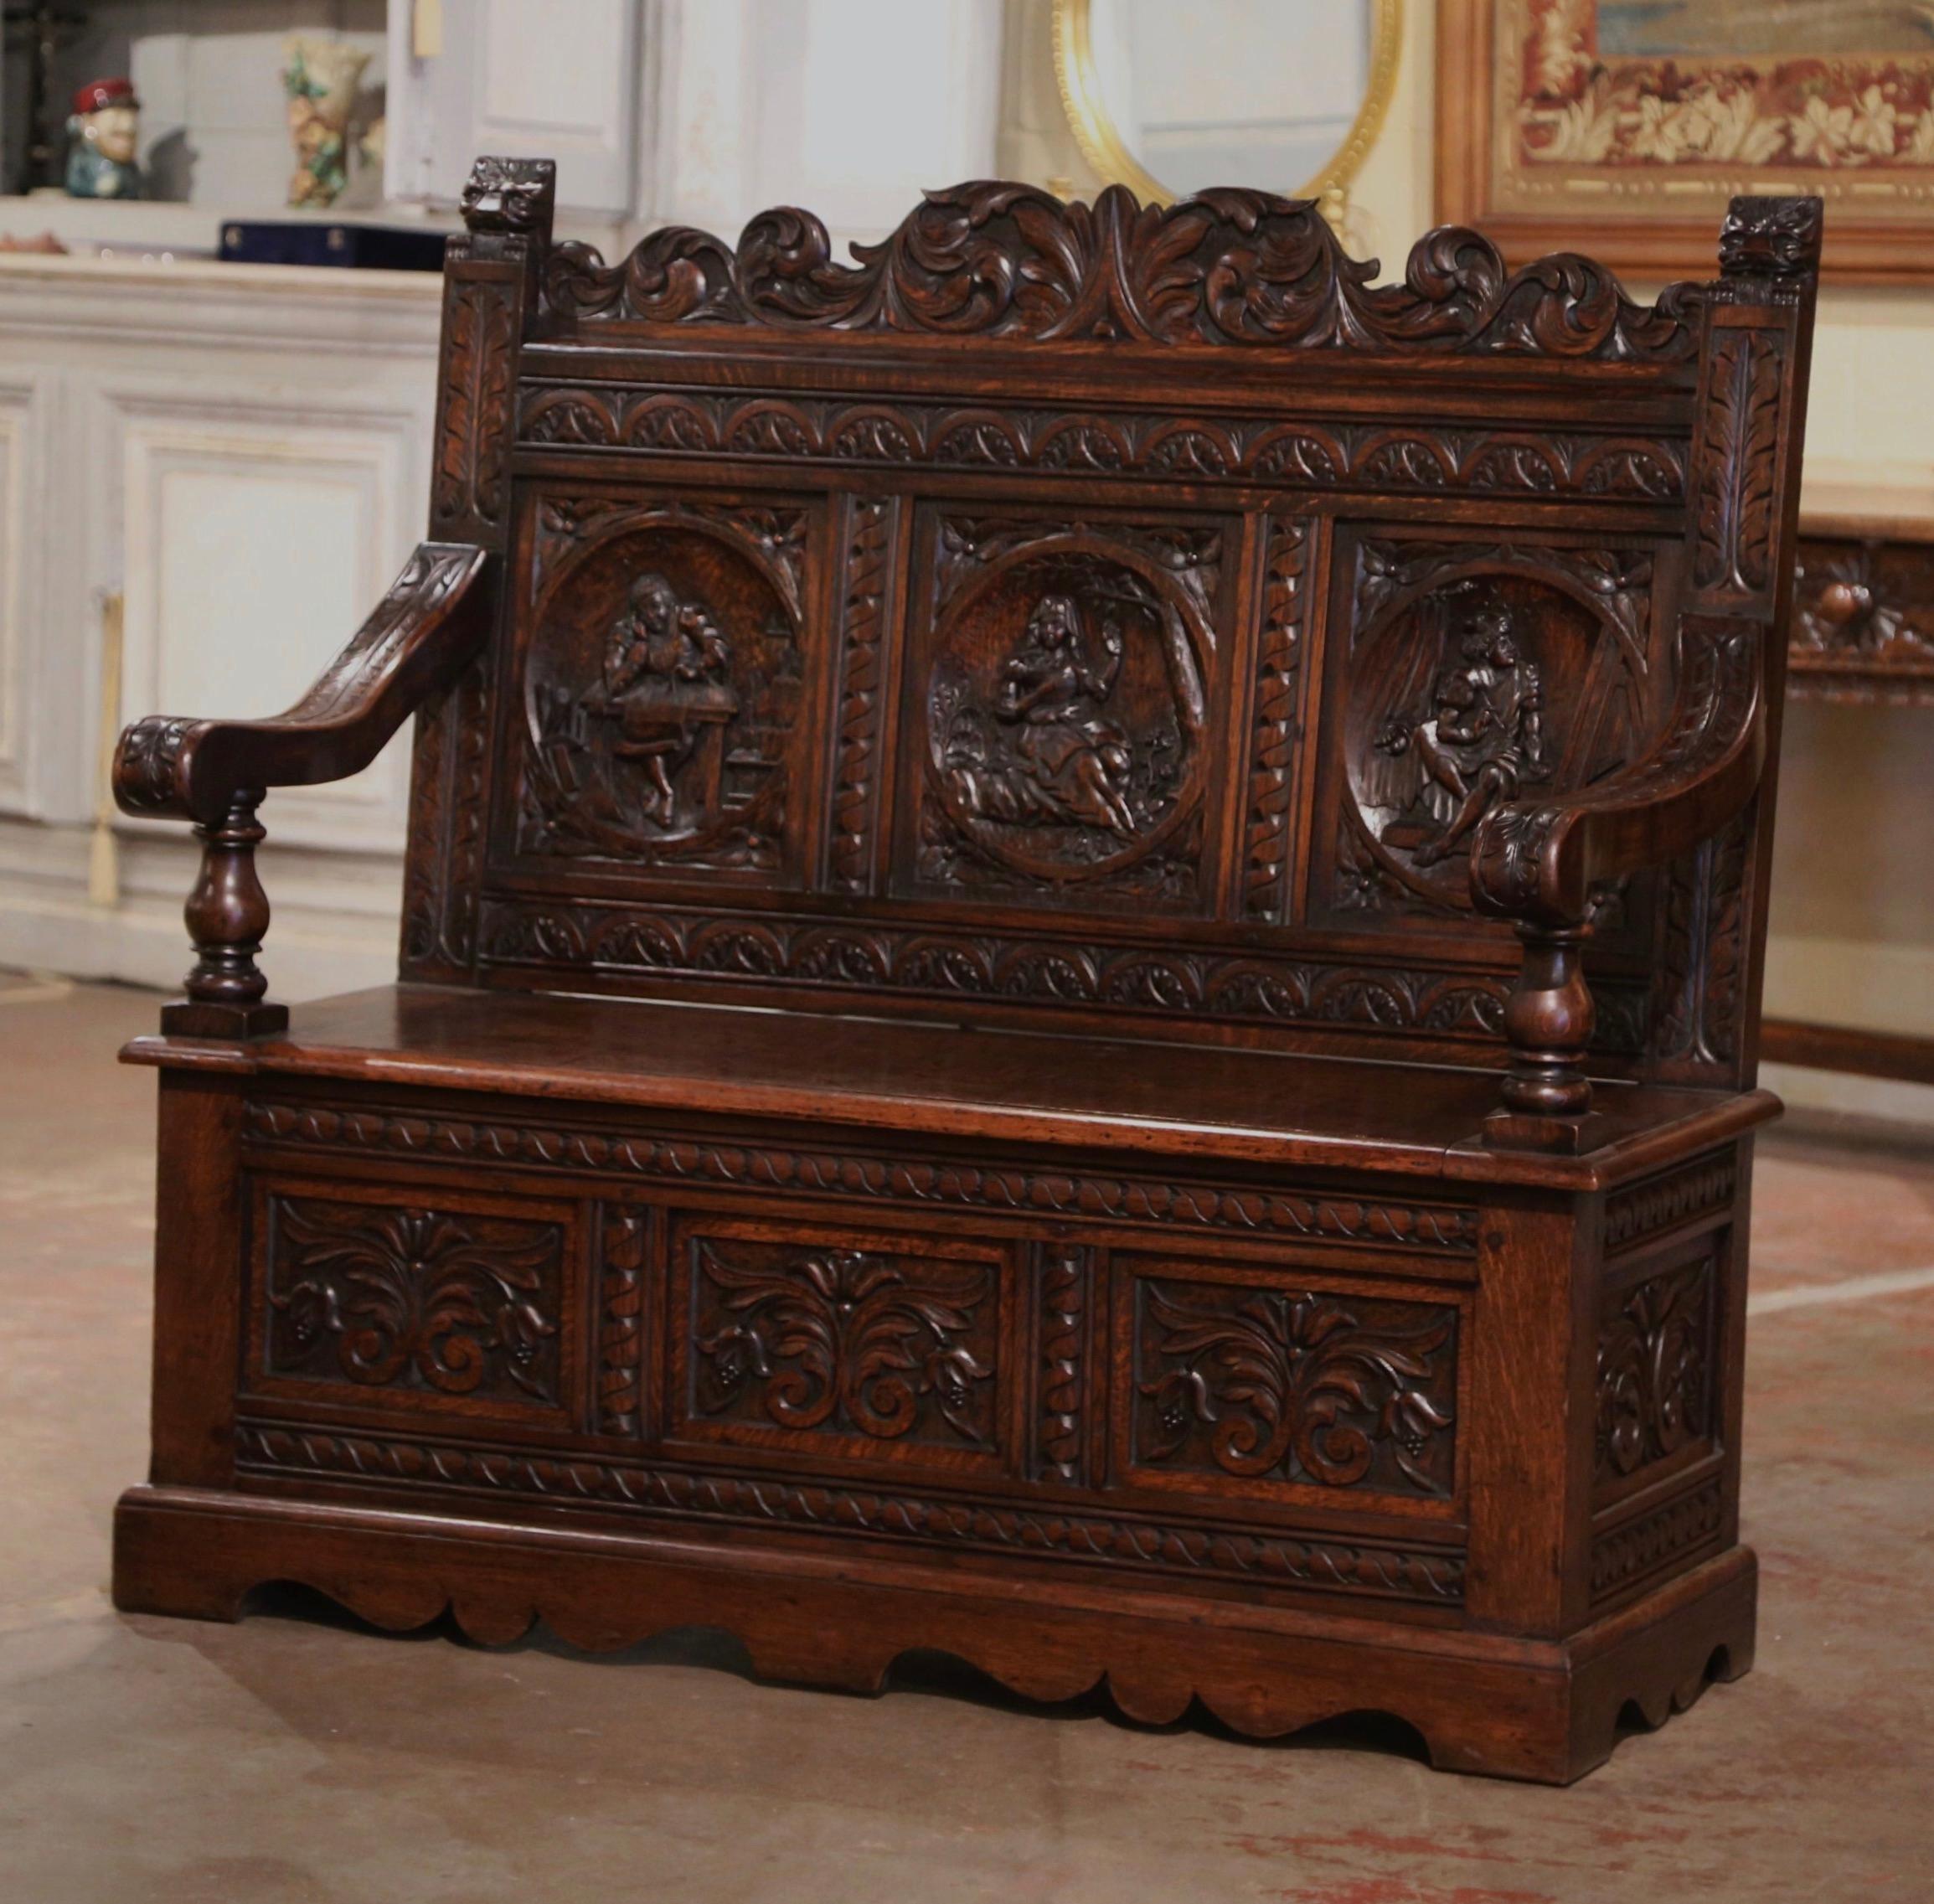 19th Century French Renaissance Carved Oak Bench with Figural Motifs For Sale 1